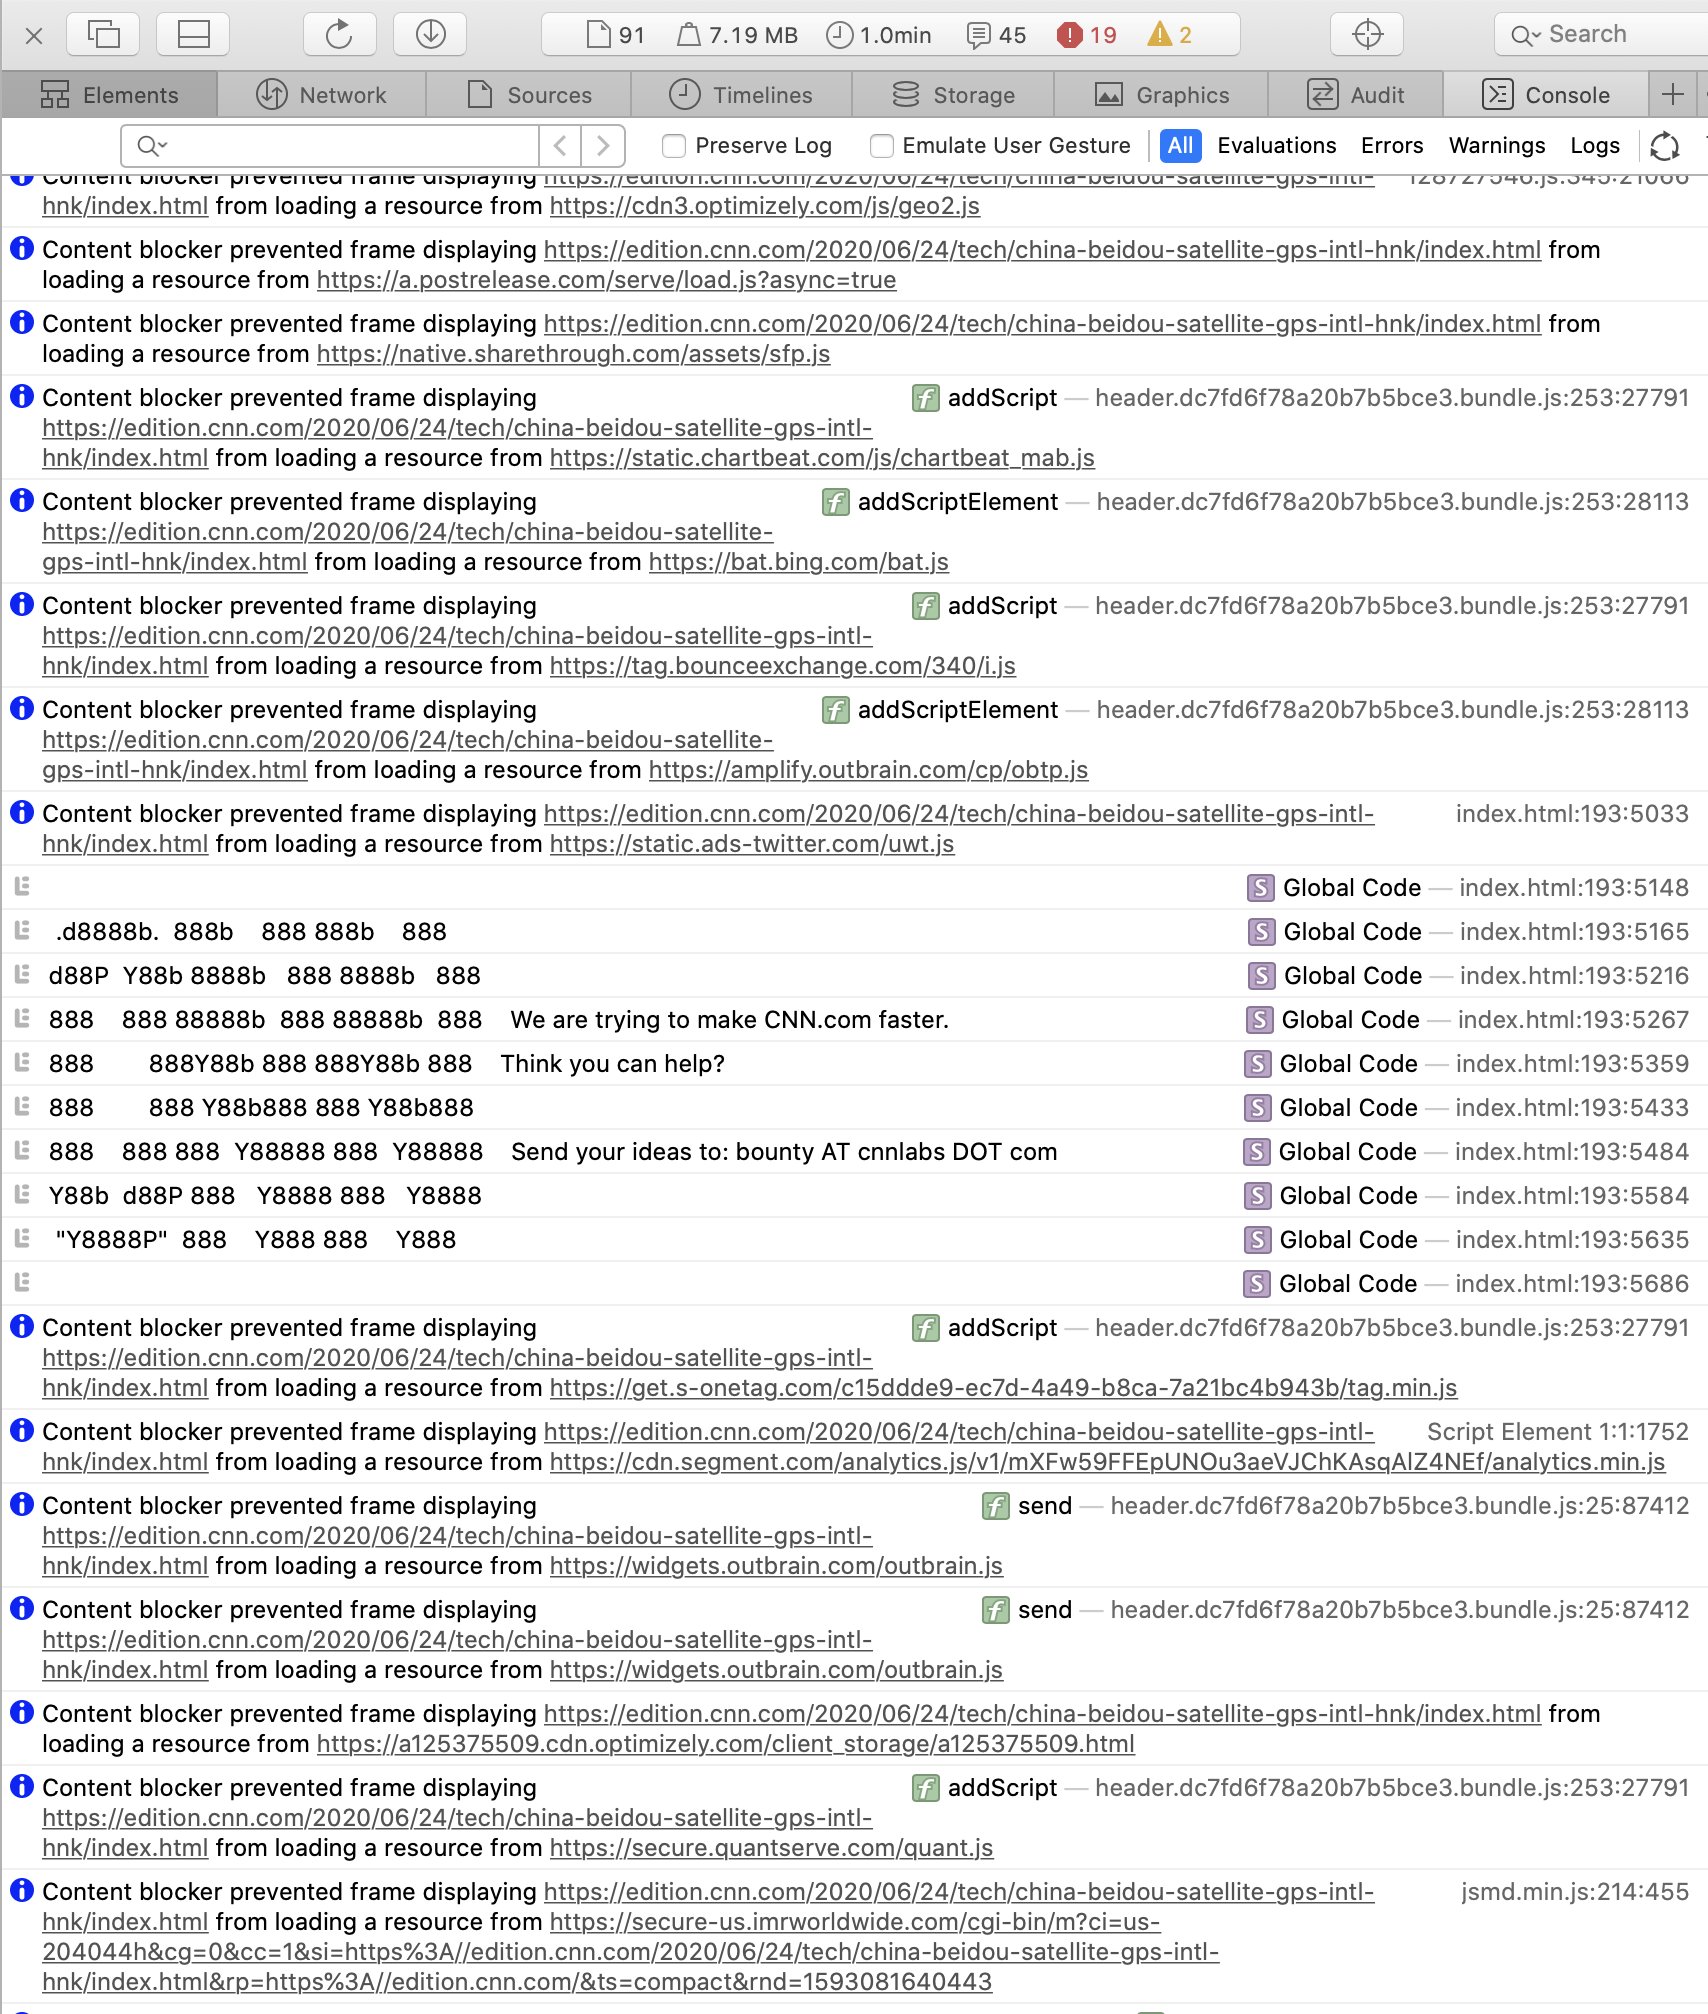 Console view of a cnn.com page showing loads of trackers being blocked and a console log message saying “We are trying to make CNN.com faster. Think you can help? Send your ideas to: bounty AT cnnlabs DOT com.”